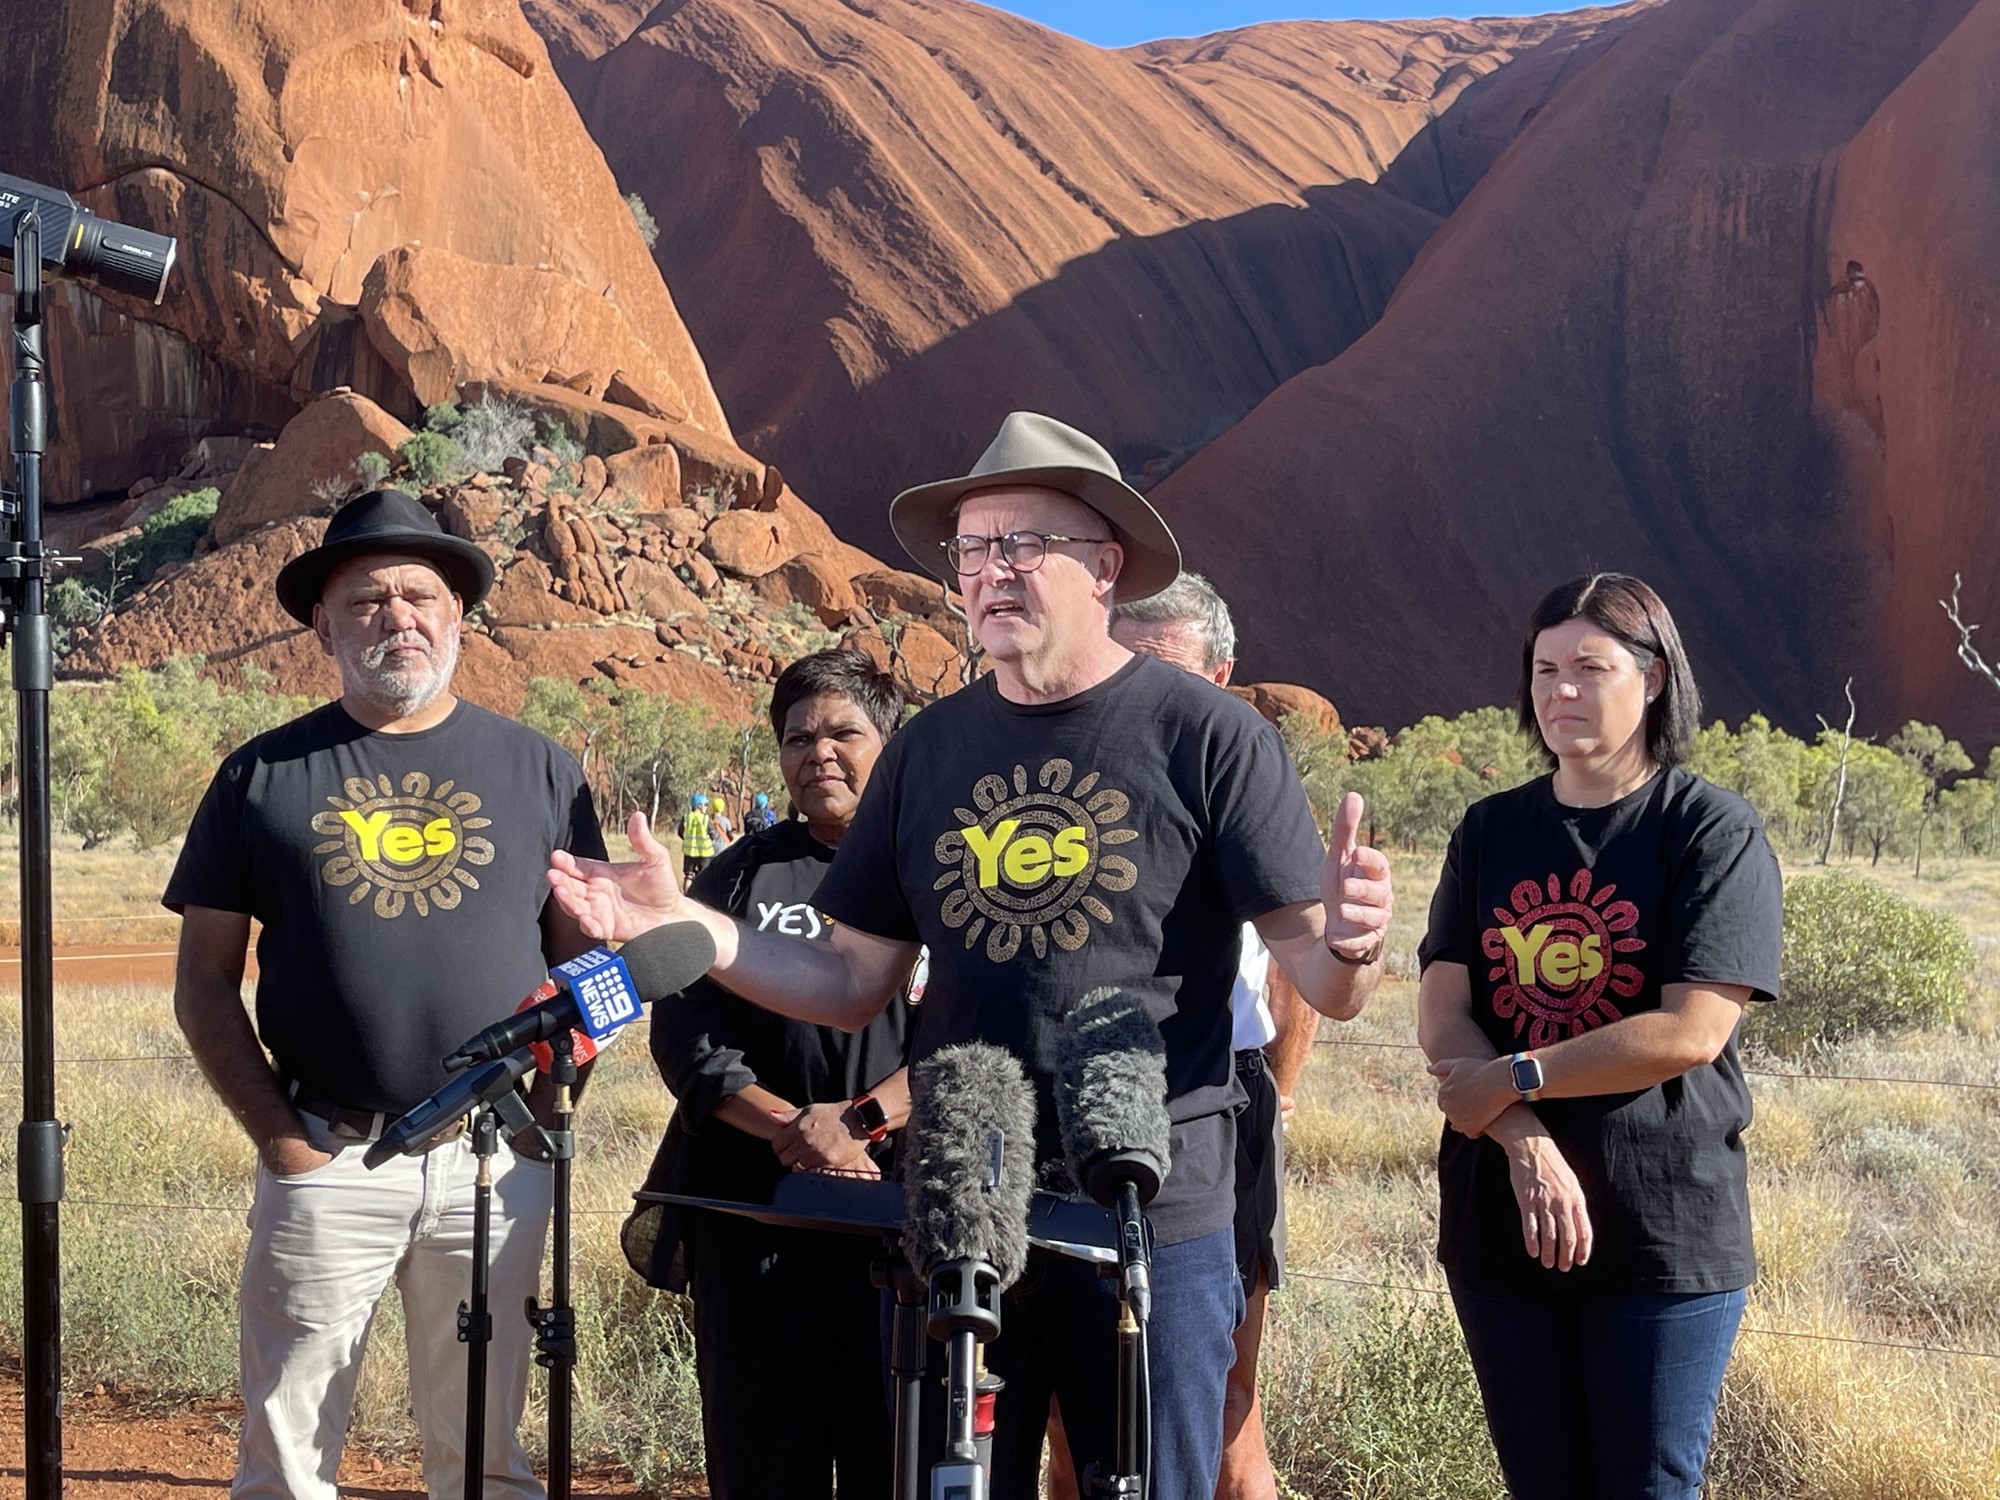 Albanese speaks at a press conference with the red rock seen behind the group.